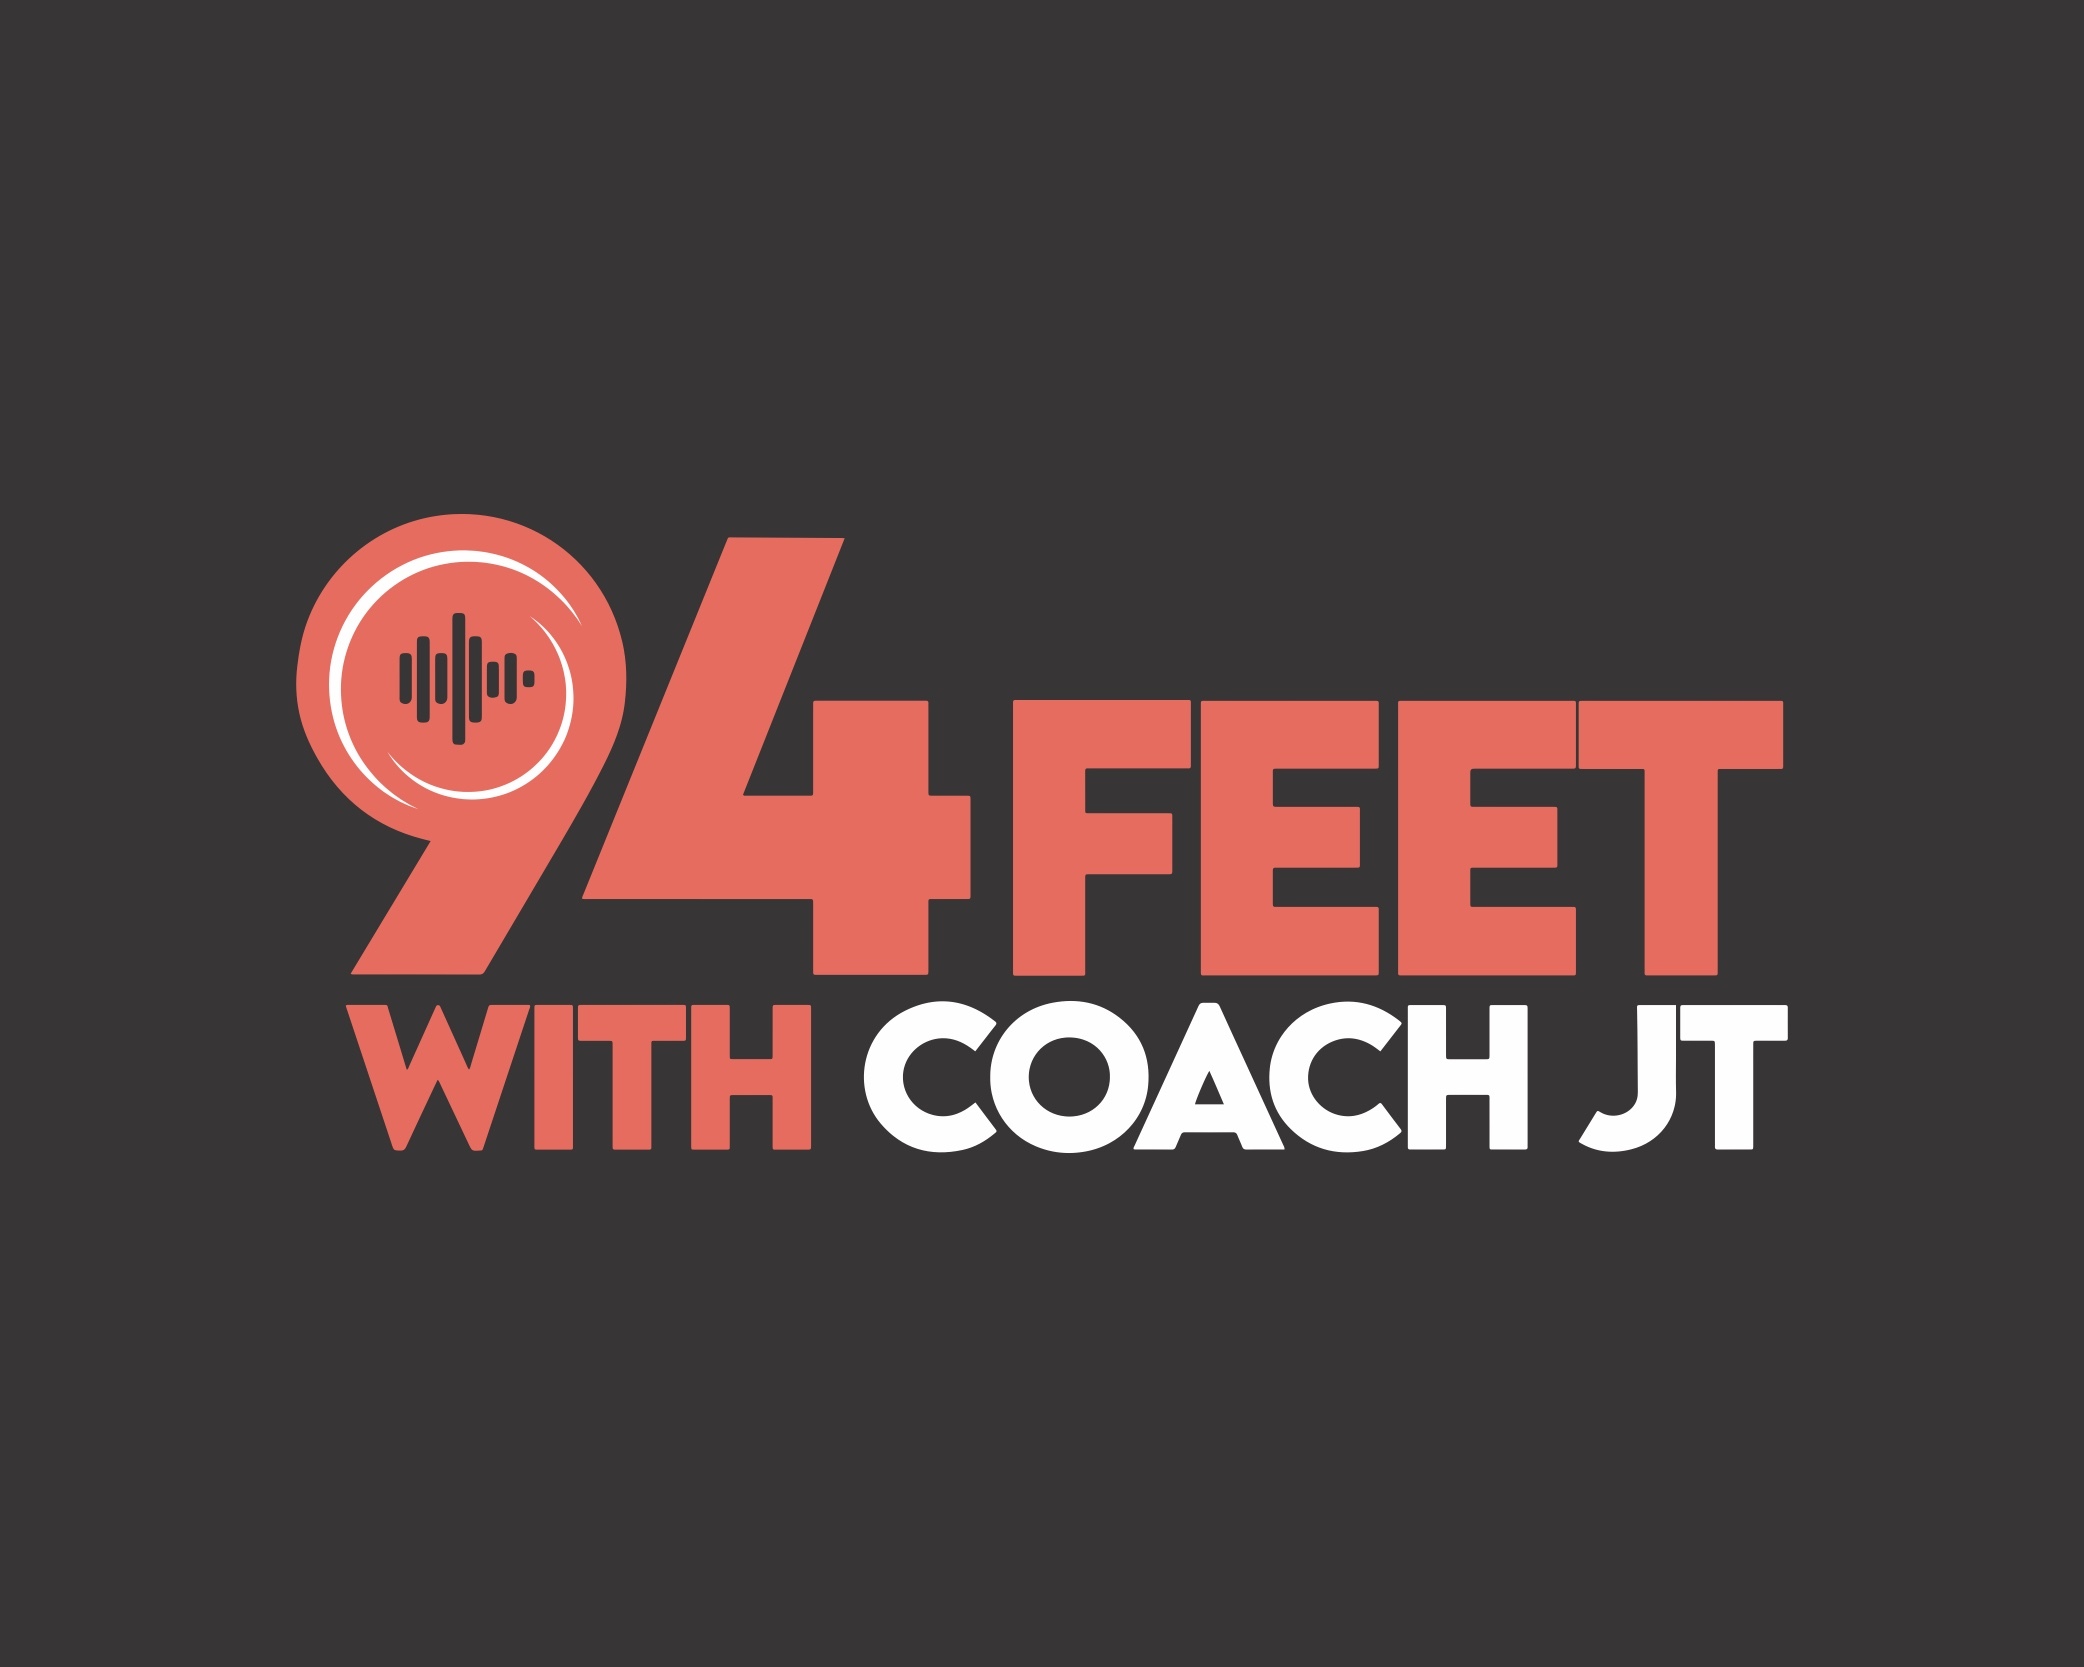 94 Feet With Coach J.T. Podcast